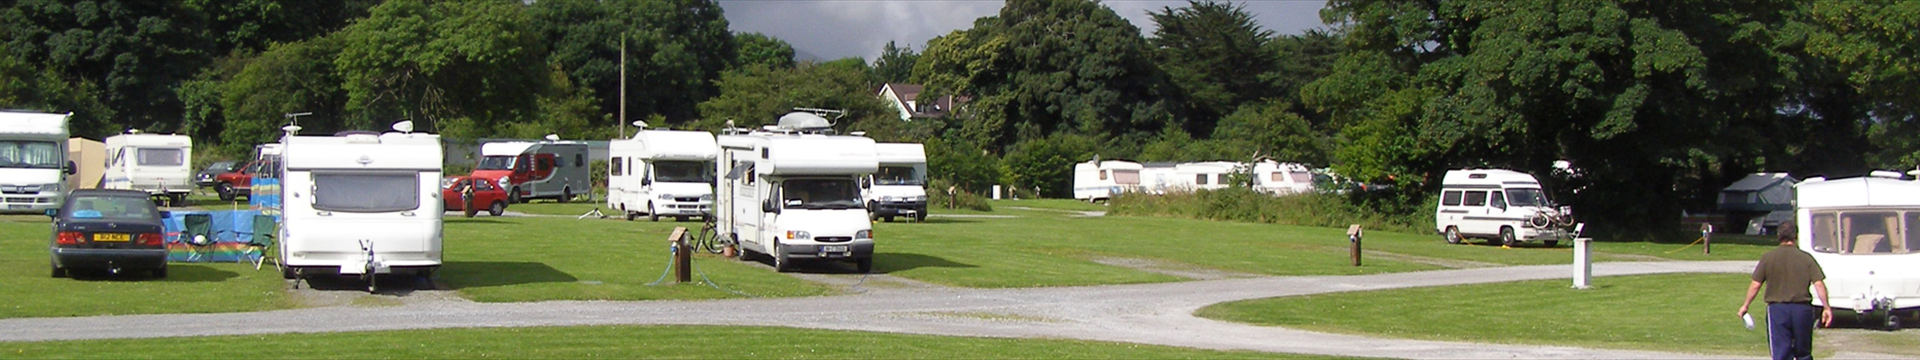 RV Park Investment Opportunities in Vermont